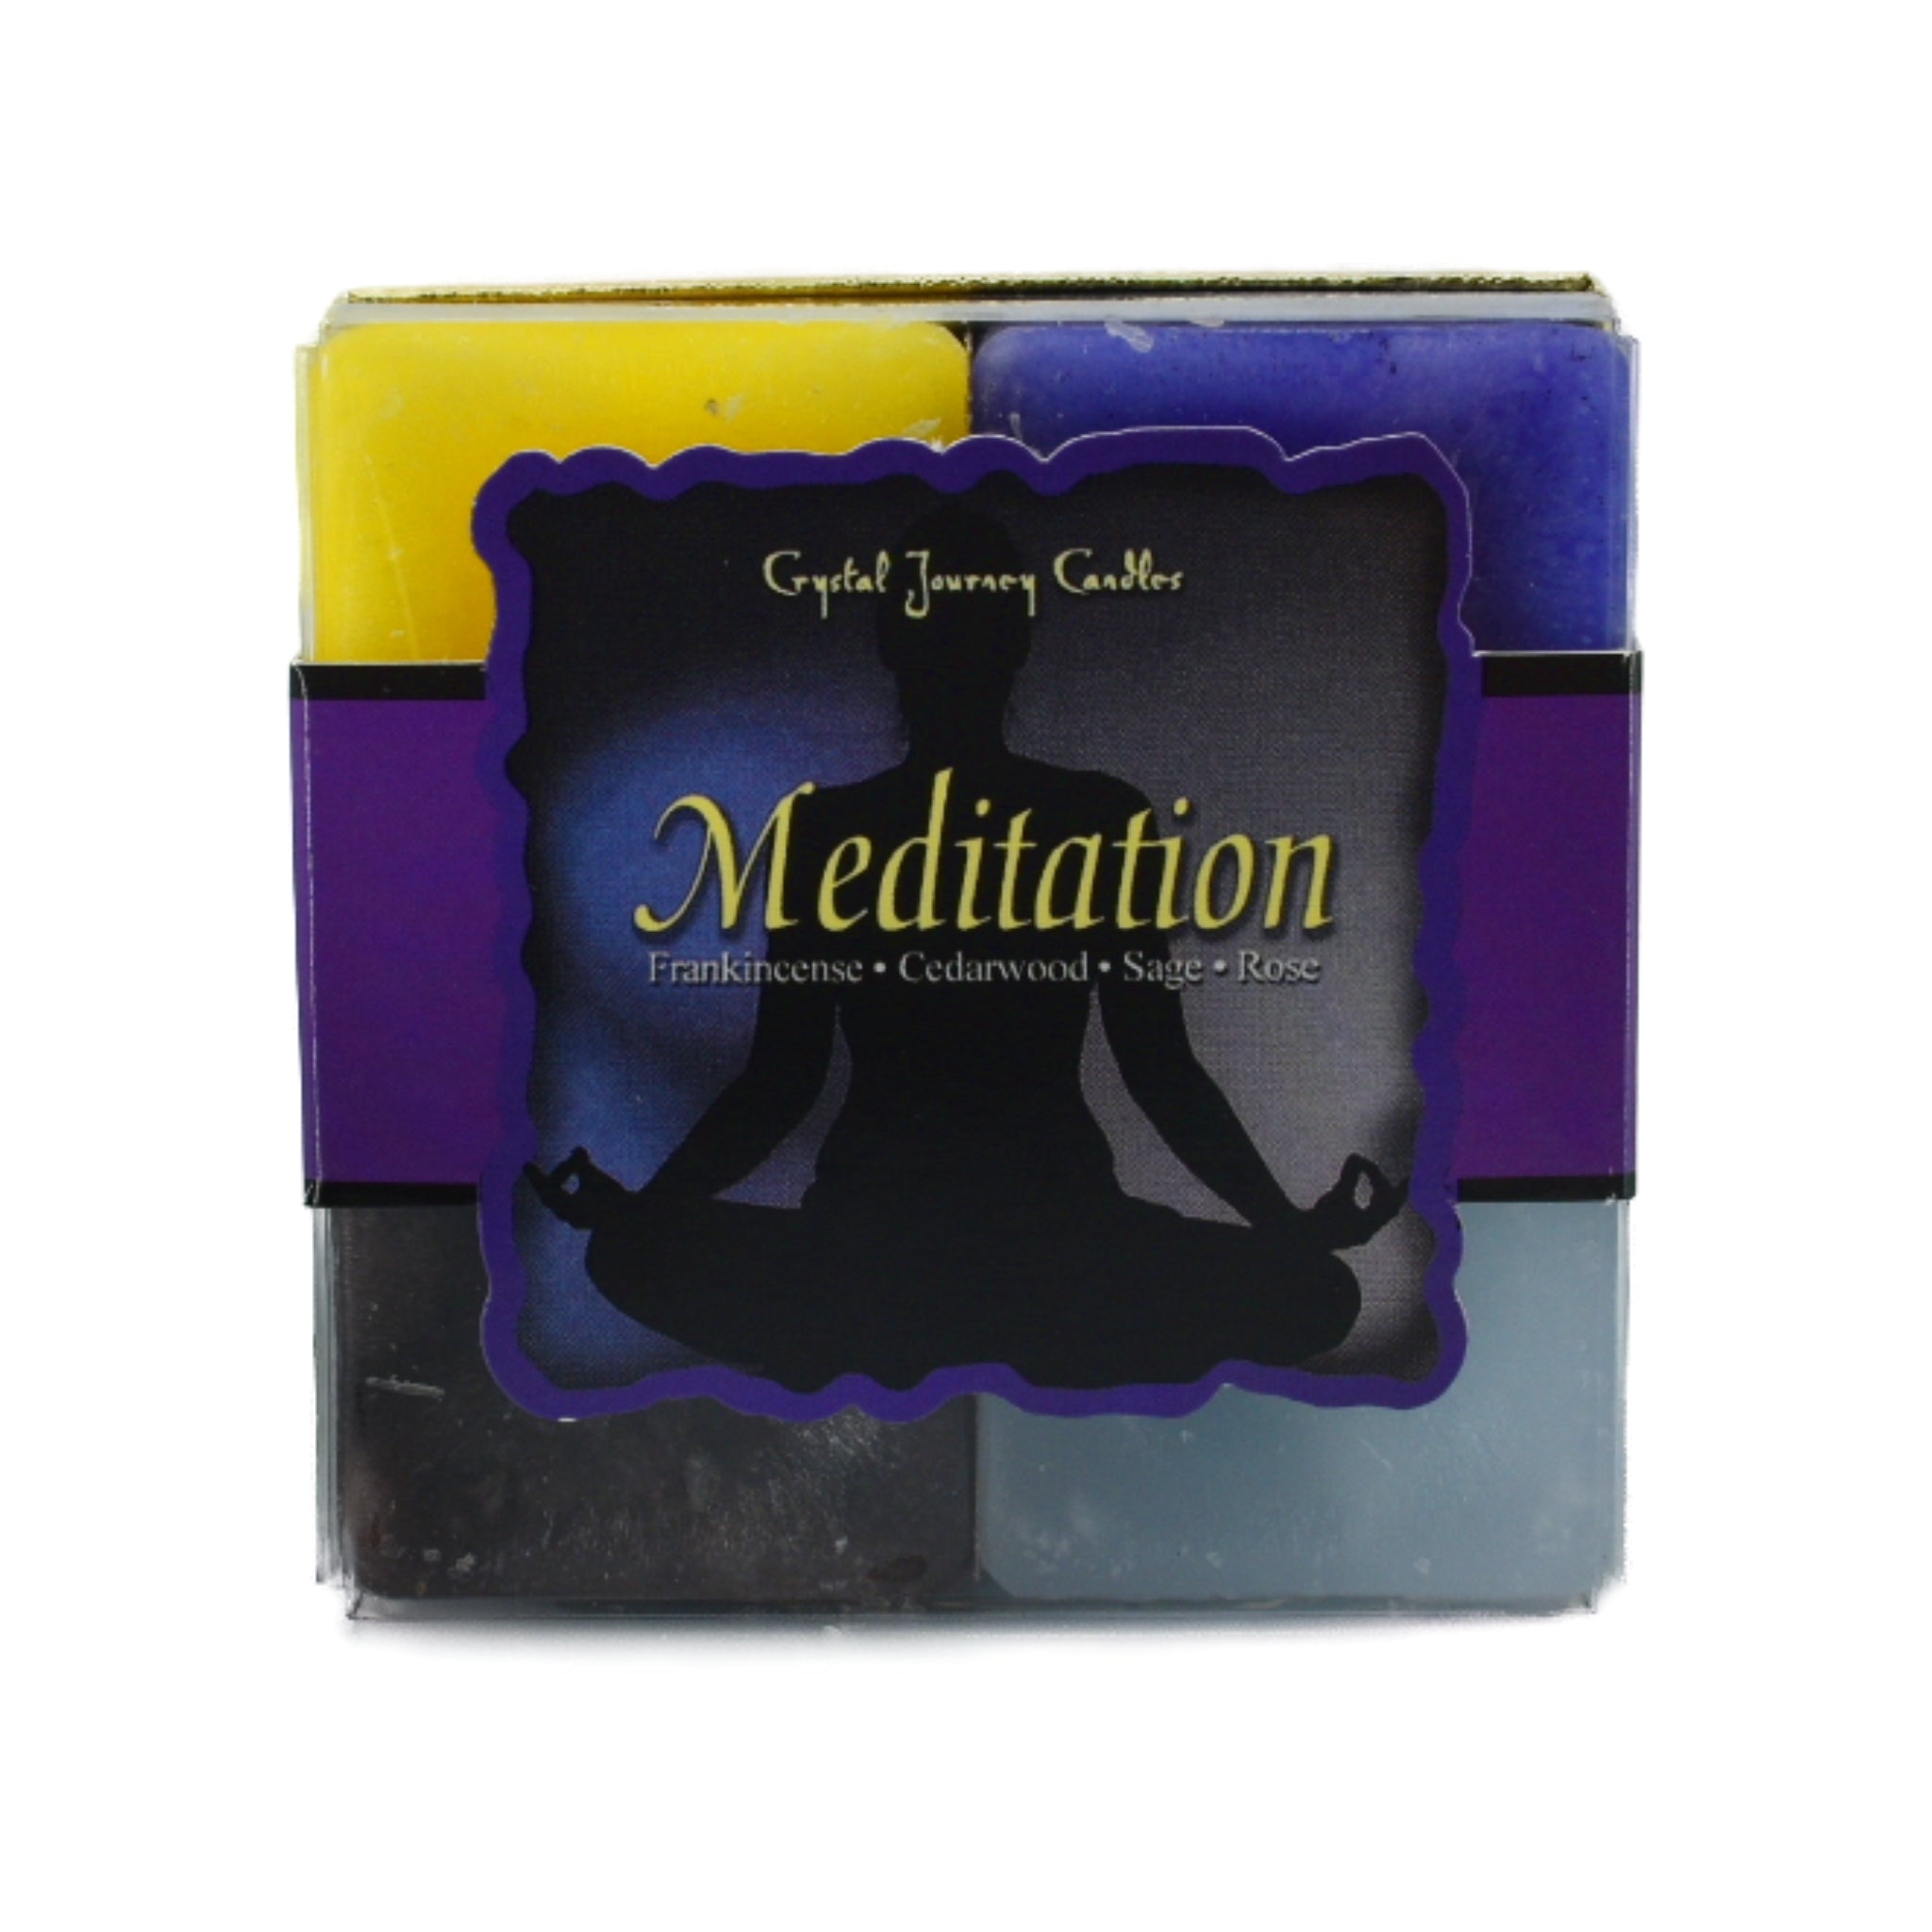 Meditation Square Pack Candle.  A set of four candles uniquely created to help you reach your inner space whenever you need to reflect on life's journey.  Candles are scented with frankincense, cedar wood, sage and rose. 